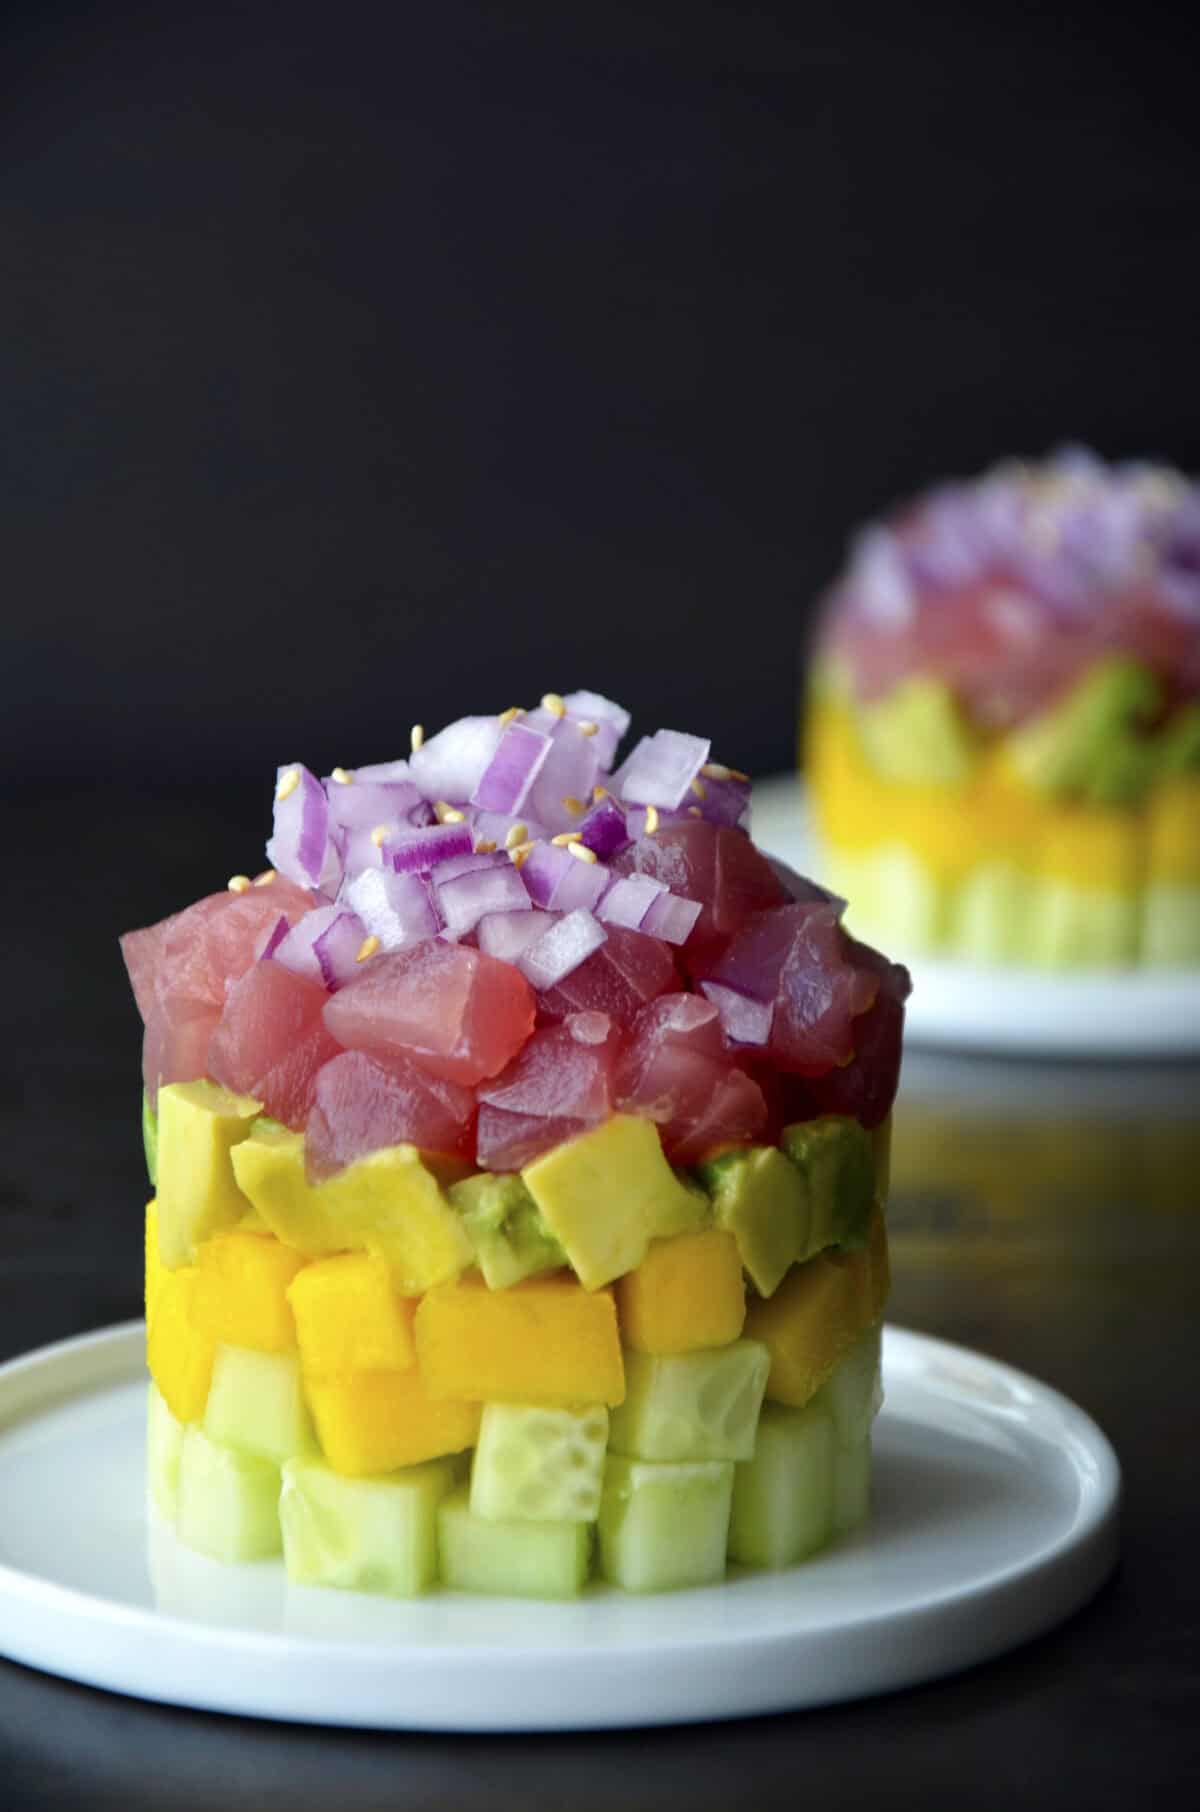 An Ahi tuna stack with cubed cucumber, mango and avocado all topped with diced red onion.